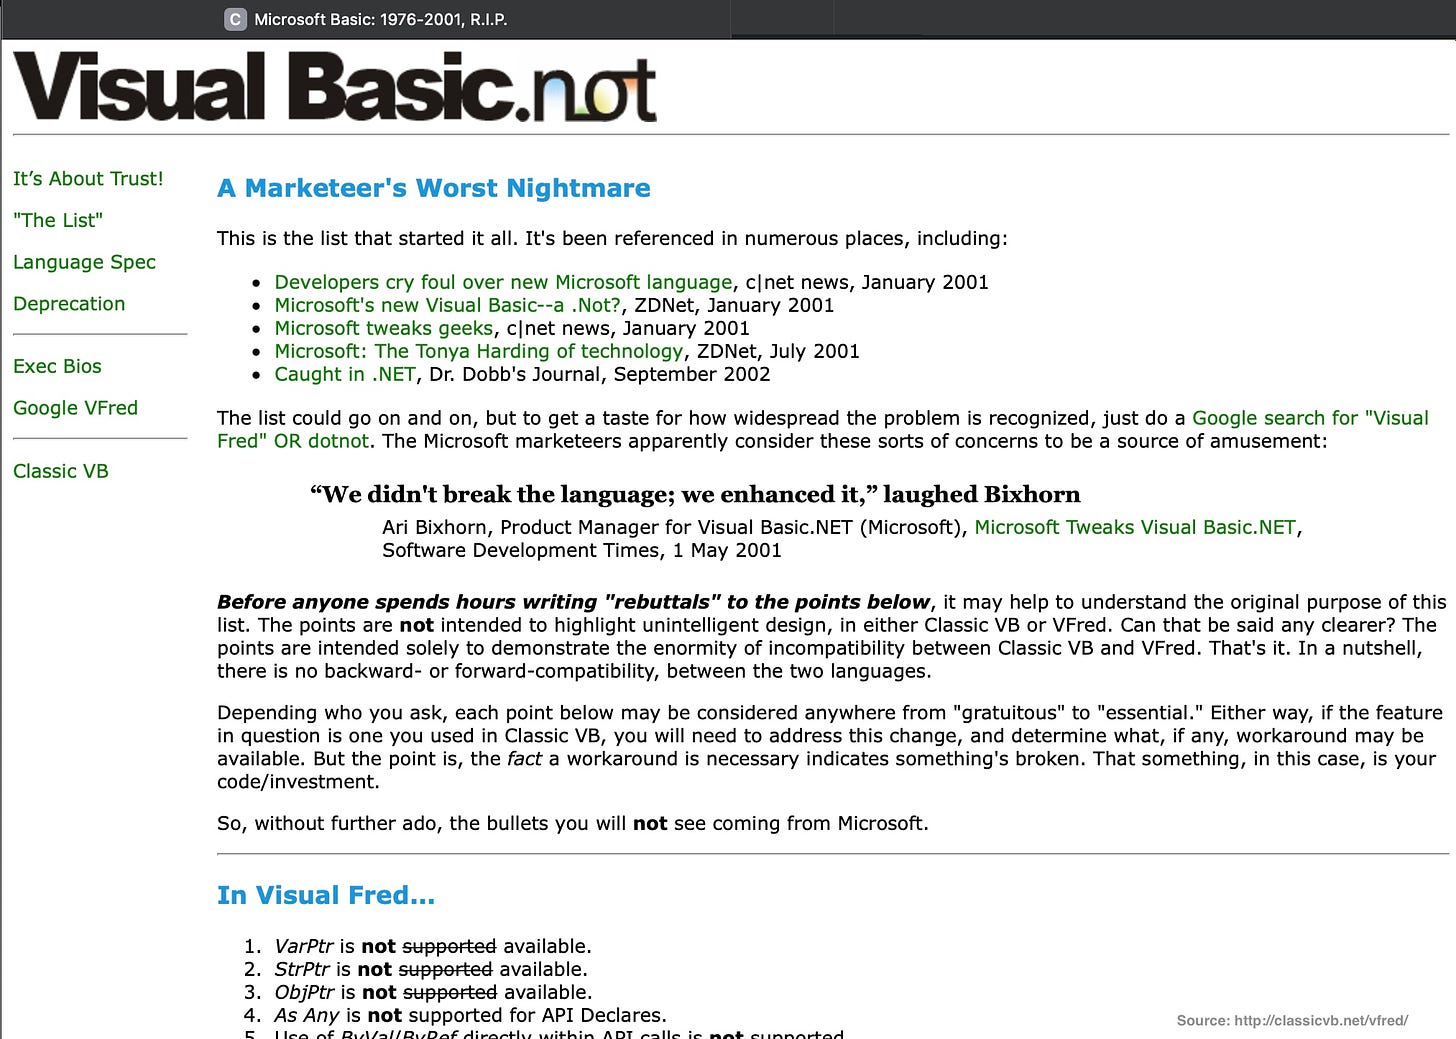 A Marketeer's Worst Nightmare This is the list that started it all. It's been referenced in numerous places, including: Developers cry foul over new Microsoft language, c|net news, January 2001 Microsoft's new Visual Basic--a .Not?, ZDNet, January 2001 Microsoft tweaks geeks, c|net news, January 2001 Microsoft: The Tonya Harding of technology, ZDNet, July 2001 Caught in .NET, Dr. Dobb's Journal, September 2002 The list could go on and on, but to get a taste for how widespread the problem is recognized, just do a Google search for "Visual Fred" OR dotnot. The Microsoft marketeers apparently consider these sorts of concerns to be a source of amusement: "We didn't break the language; we enhanced it," laughed Bixhorn Ari Bixhorn, Product Manager for Visual Basic.NET (Microsoft), Microsoft Tweaks Visual Basic.NET, Software Development Times, 1 May 2001 Before anyone spends hours writing "rebuttals" to the points below, it may help to understand the original purpose of this list. The points are not intended to highlight unintelligent design, in either Classic VB or VFred. Can that be said any clearer? The points are intended solely to demonstrate the enormity of incompatibility between Classic VB and Fred. That's it. In a nutshell, there is no backward- or forward-compatibility, between the two languages. Depending who you ask, each point below may be considered anywhere from "gratuitous" to "essential." Either way, if the feature in question is one you used in Classic VB, you will need to address this change, and determine what, if any, workaround may be available. But the point is, the fact a workaround is necessary indicates something's broken. That something, in this case, is your code/investment. So, without further ado, the bullets you will not see coming from Microsoft. In Visual Fred... 1. VarPtr is not supported available, 2. StrPtr is not supported available. 3. ObiPtr is not supported available. 4. As Any is not supported for API Declares